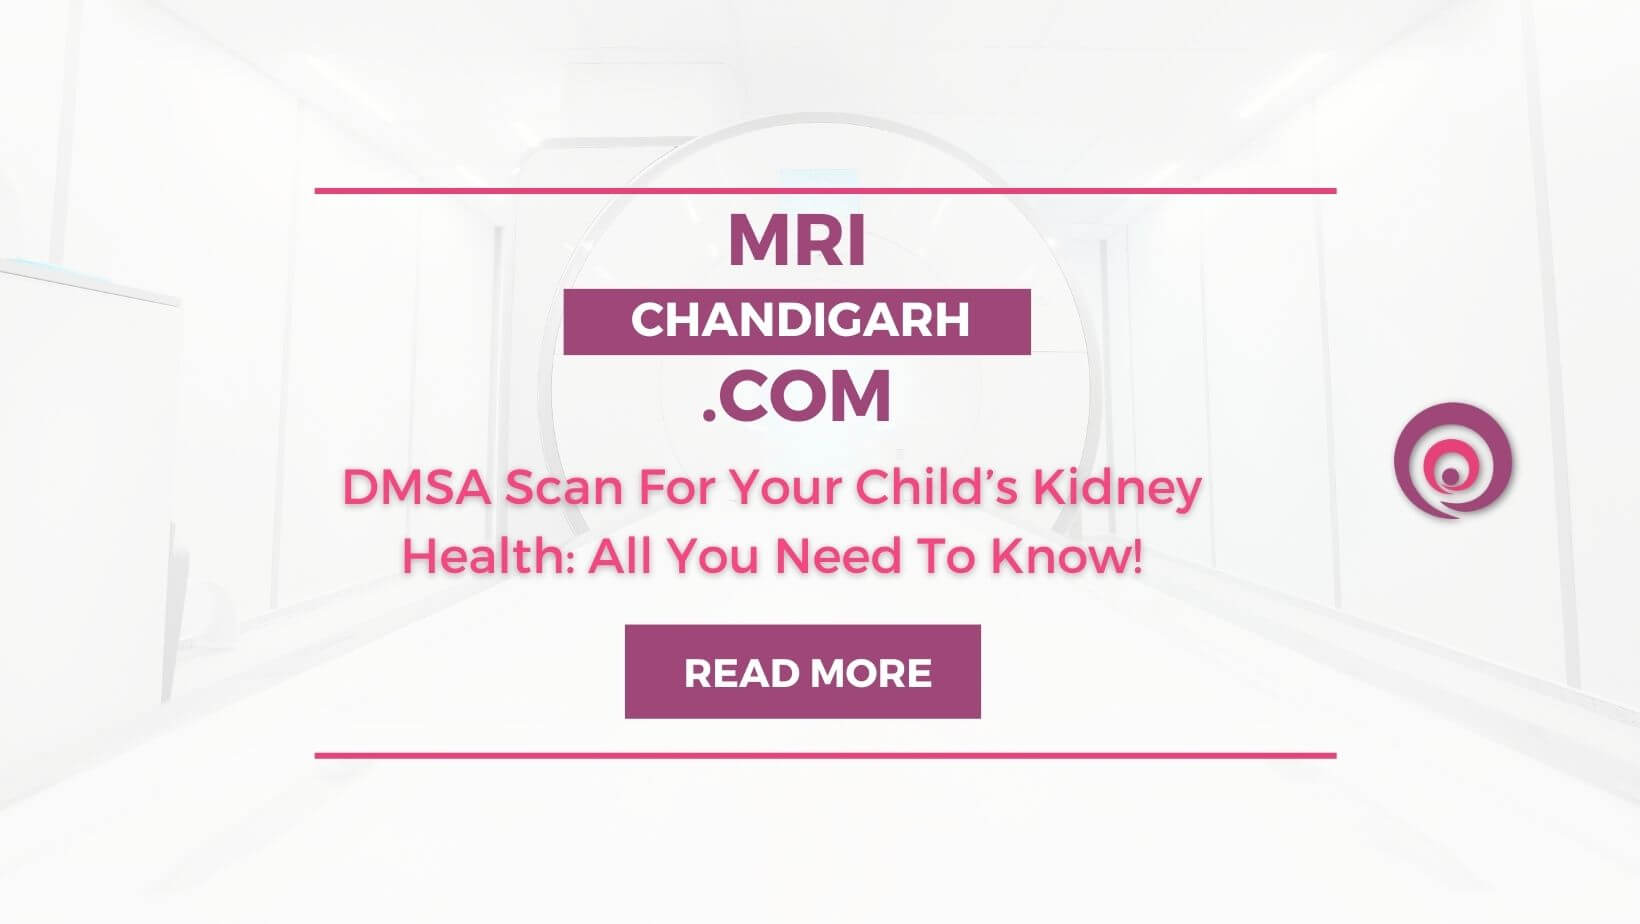 DMSA Scan For Your Child’s Kidney Health: All You Need To Know!